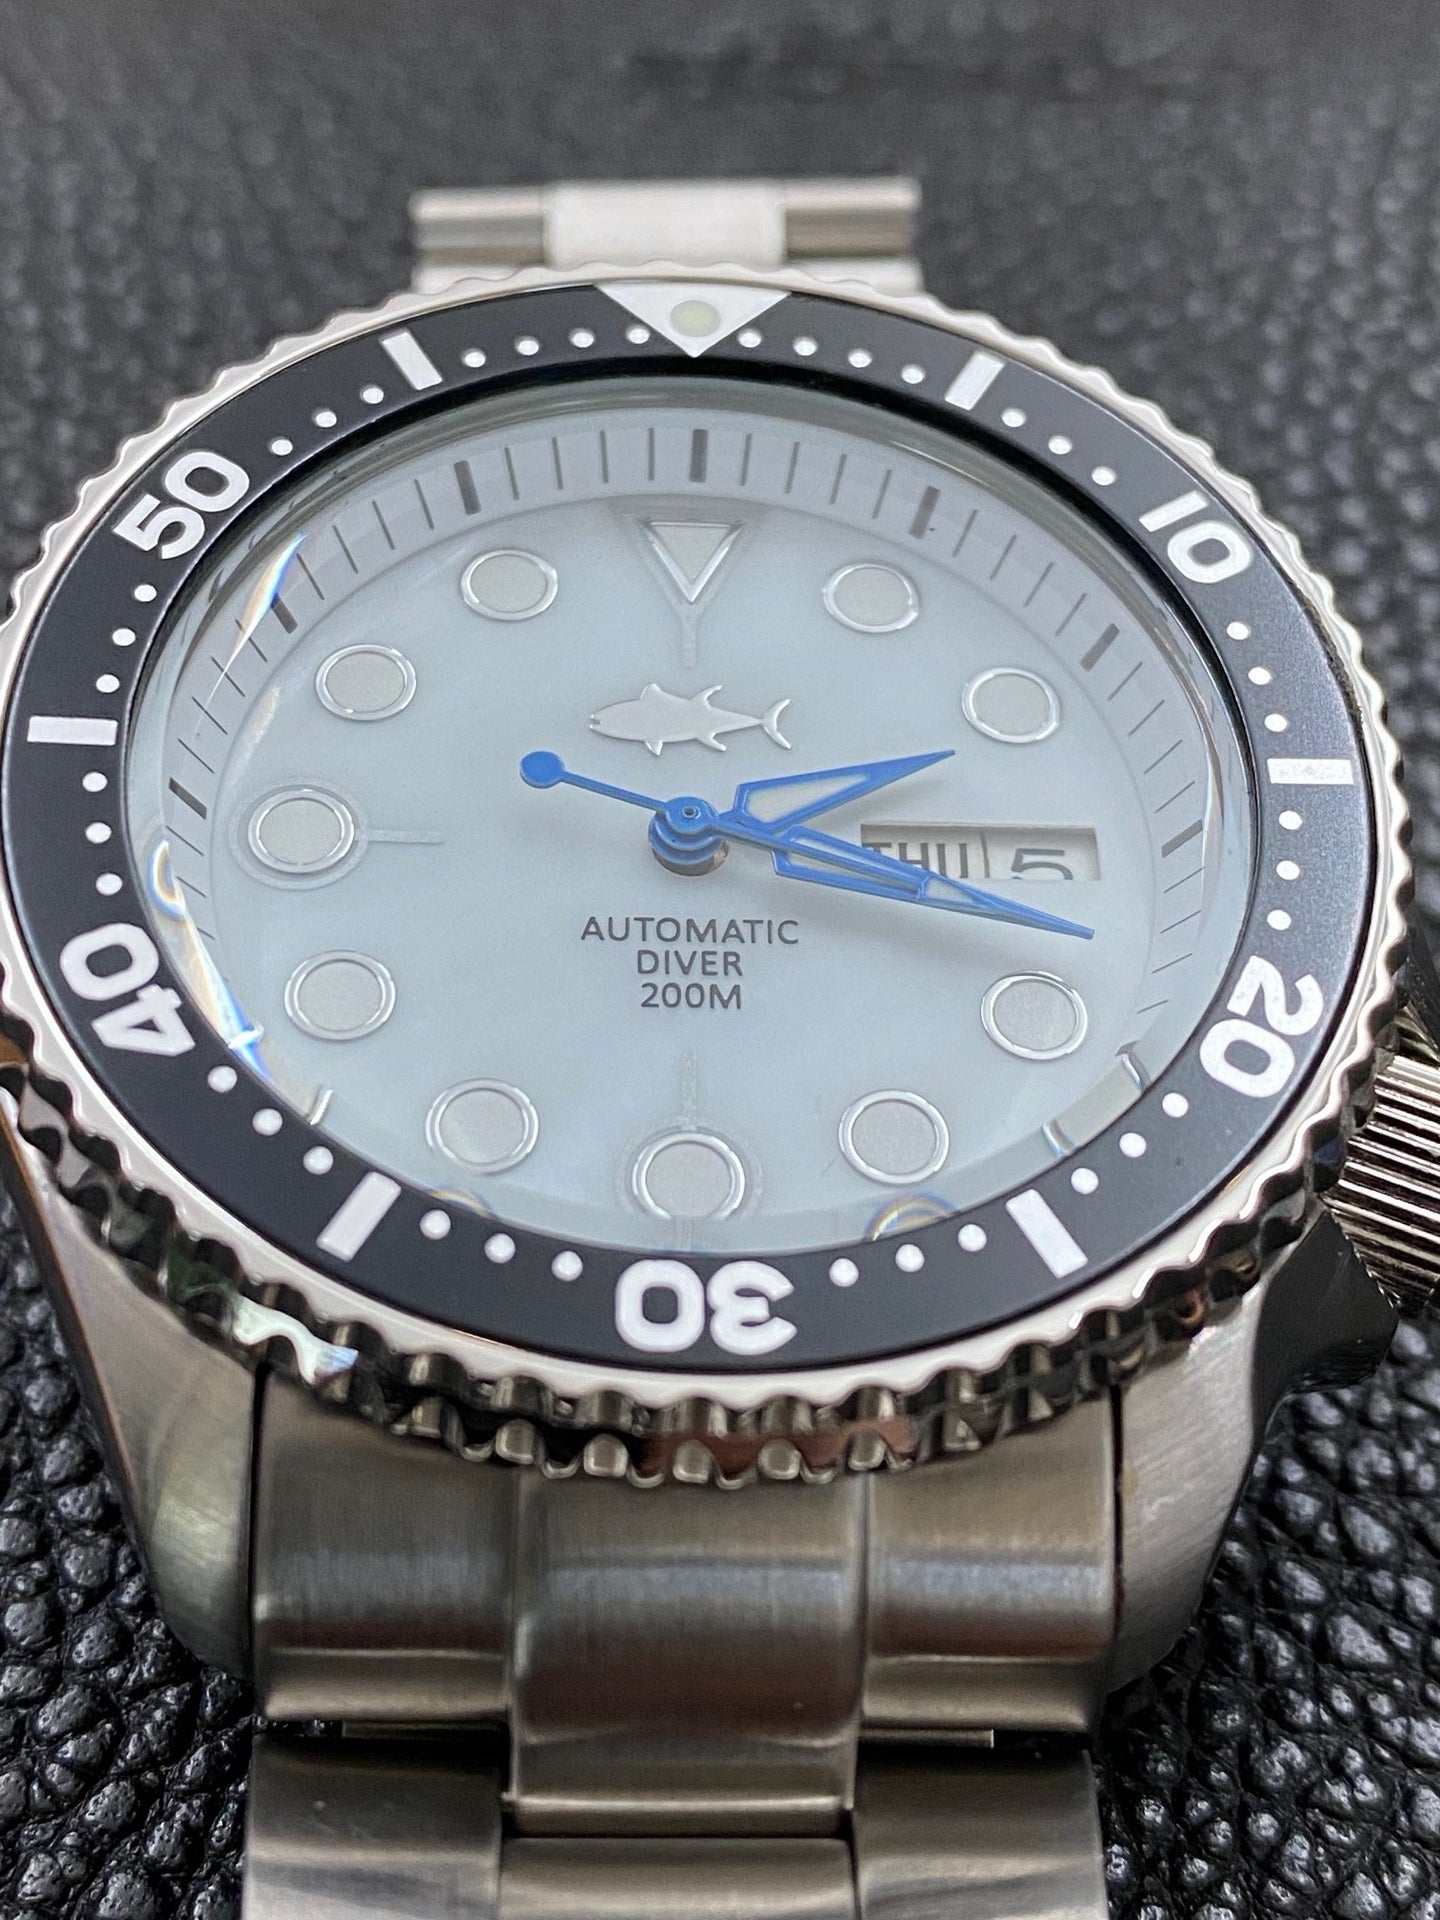 FS: Modded Seiko SKX007 - Mother of Pearl Dial | WatchUSeek Watch Forums